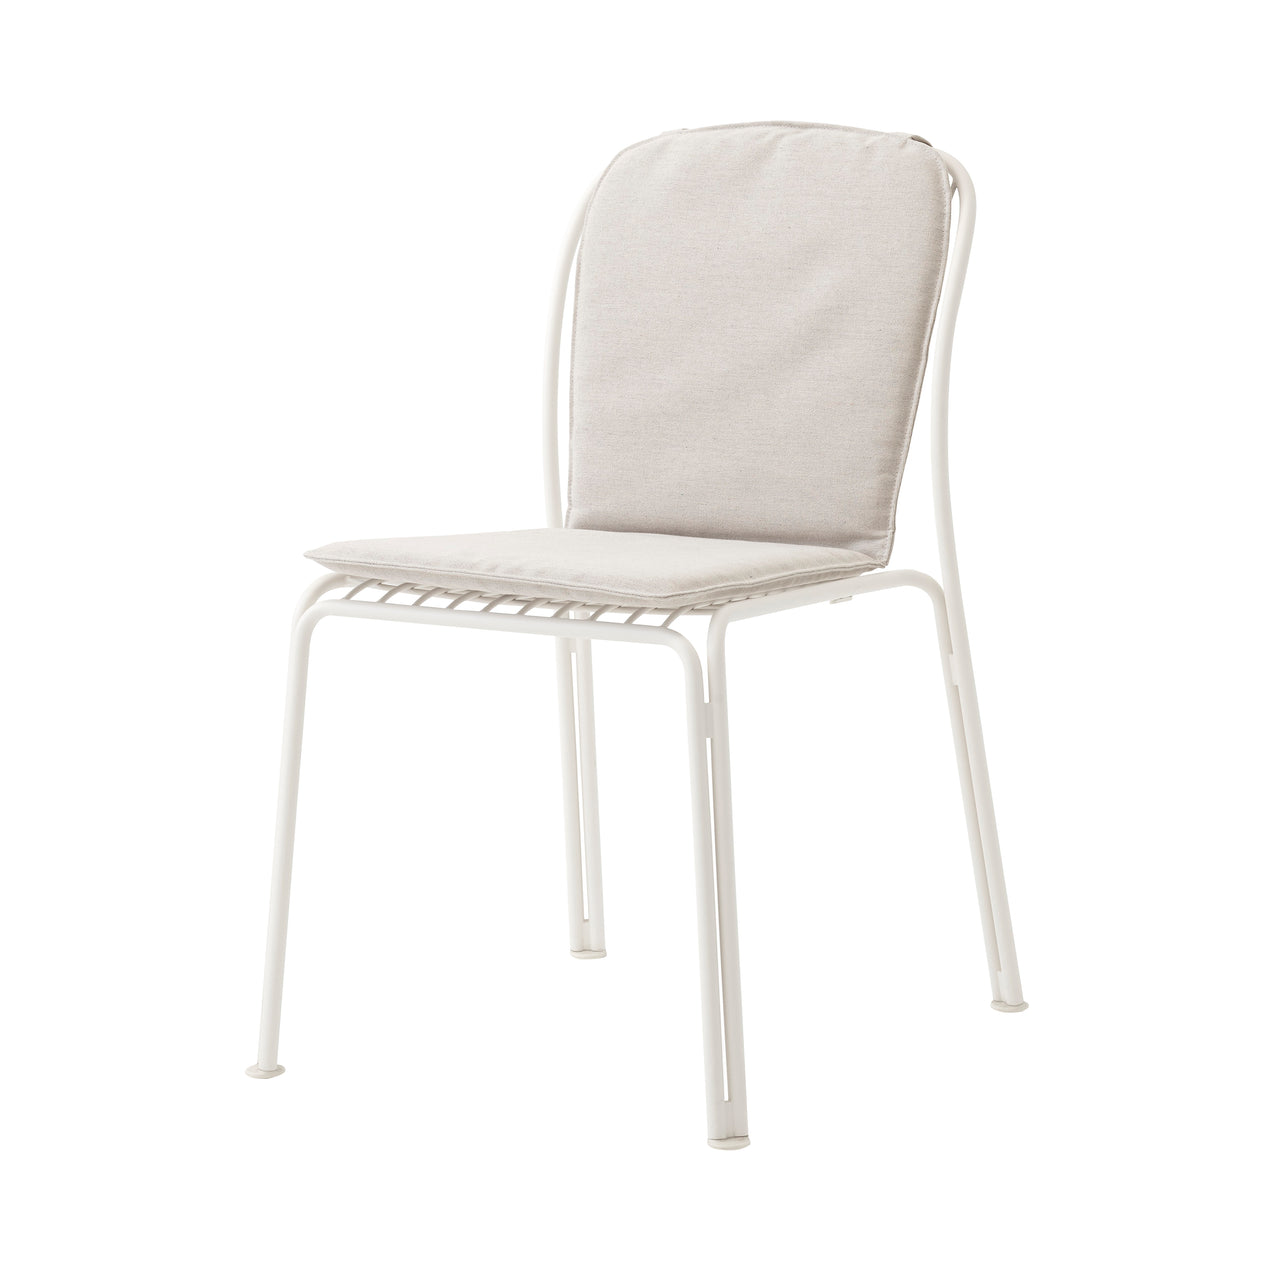 Thorvald SC94 Side Chair: Outdoor + Ivory + With Heritage Papyrus Cushion